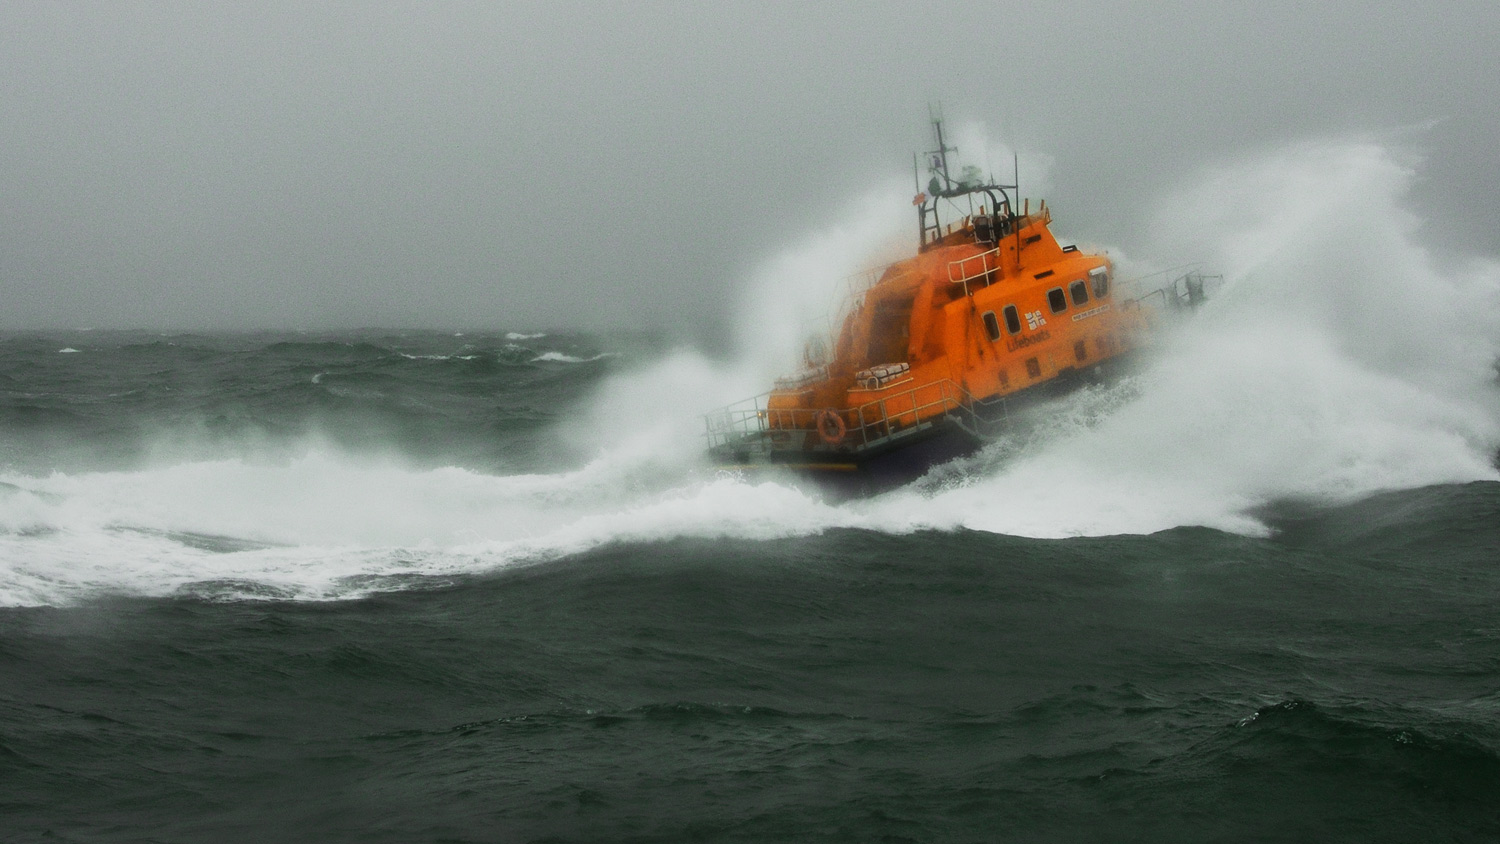 Severn class lifeboat breaks through a wave